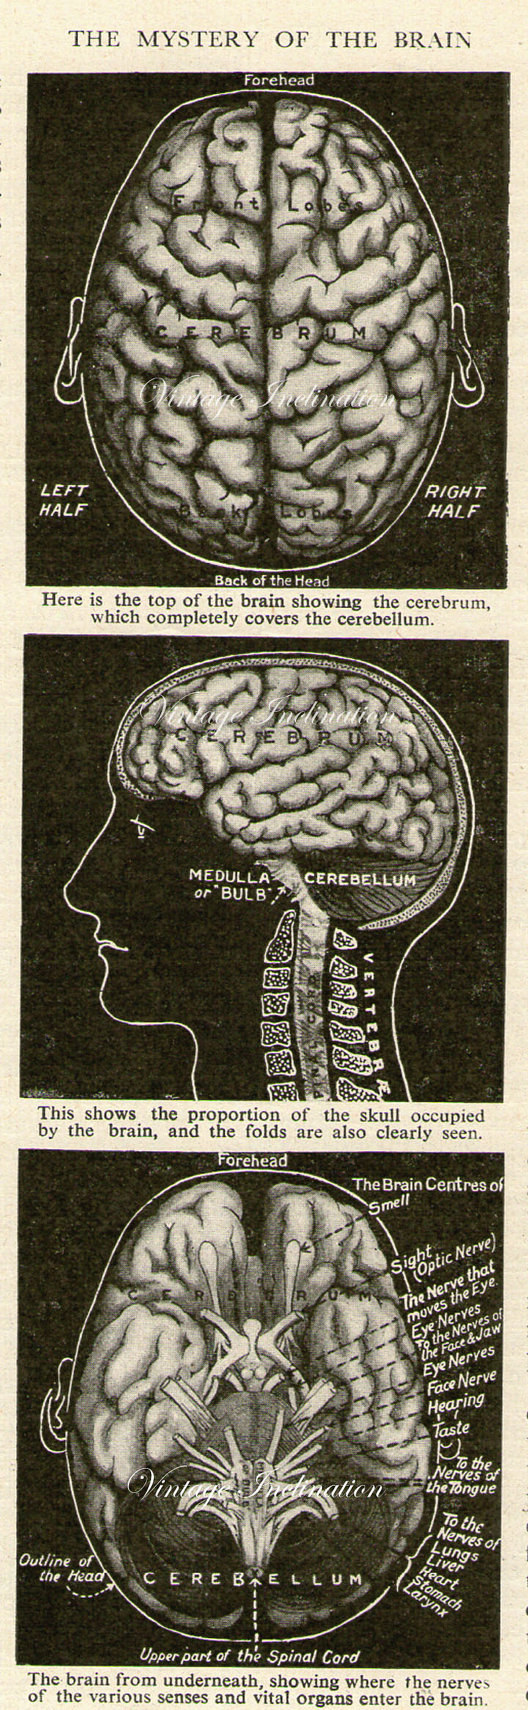 This antique medical illustration of the human brain because, you know, "braaaaaains."